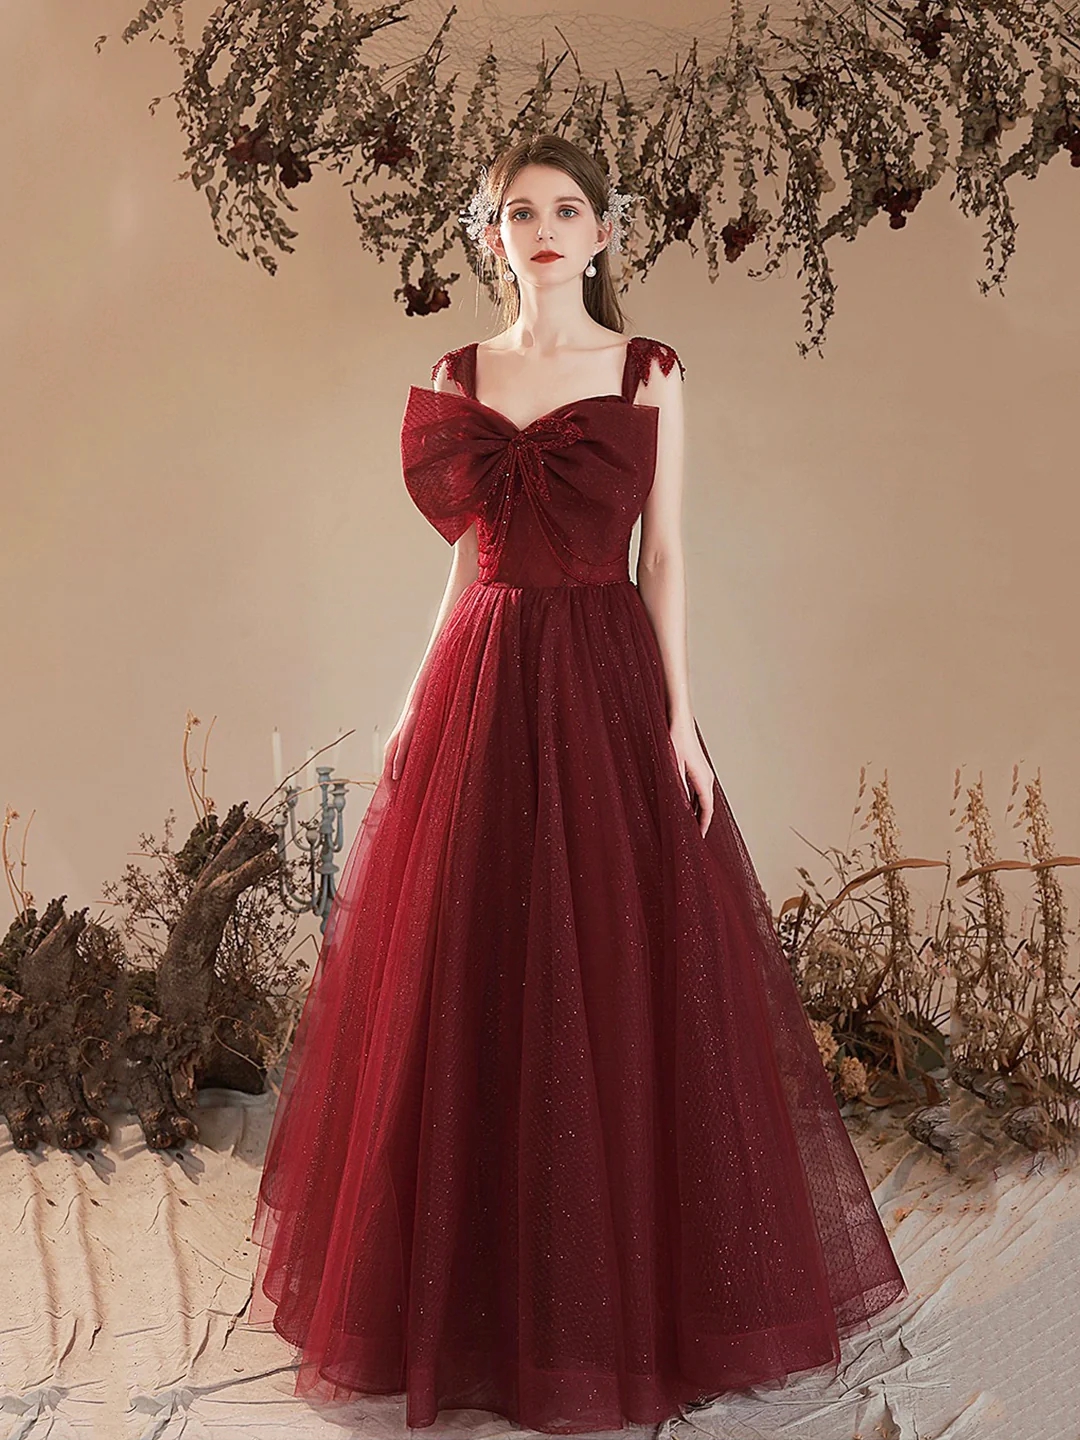 Lovely A-line Burgundy Tulle Long Prom Dress With Bow